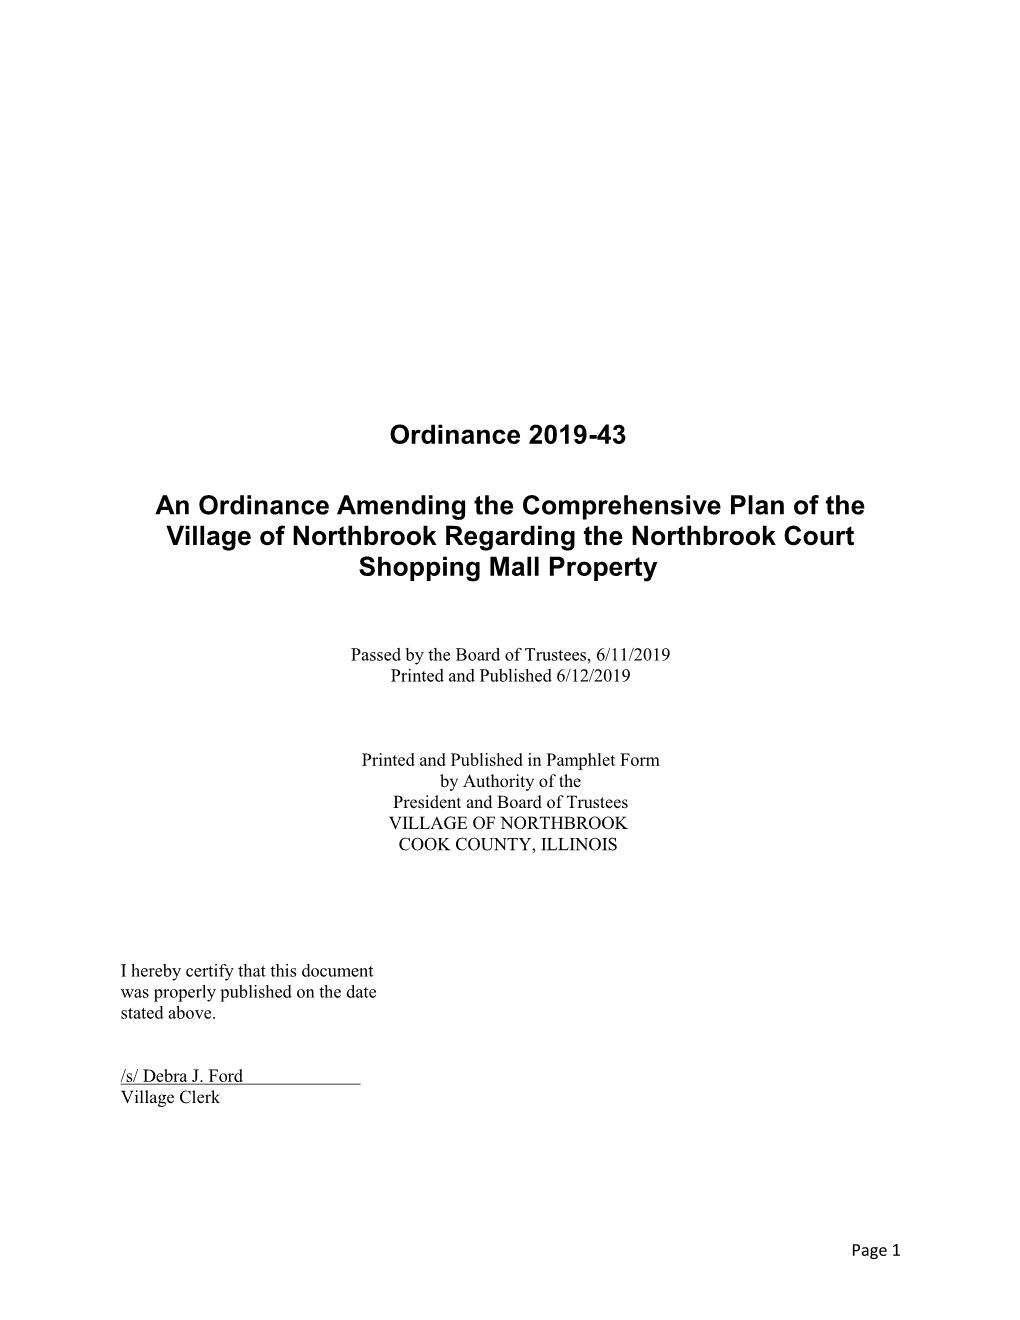 Ordinance Amending the Comprehensive Plan For